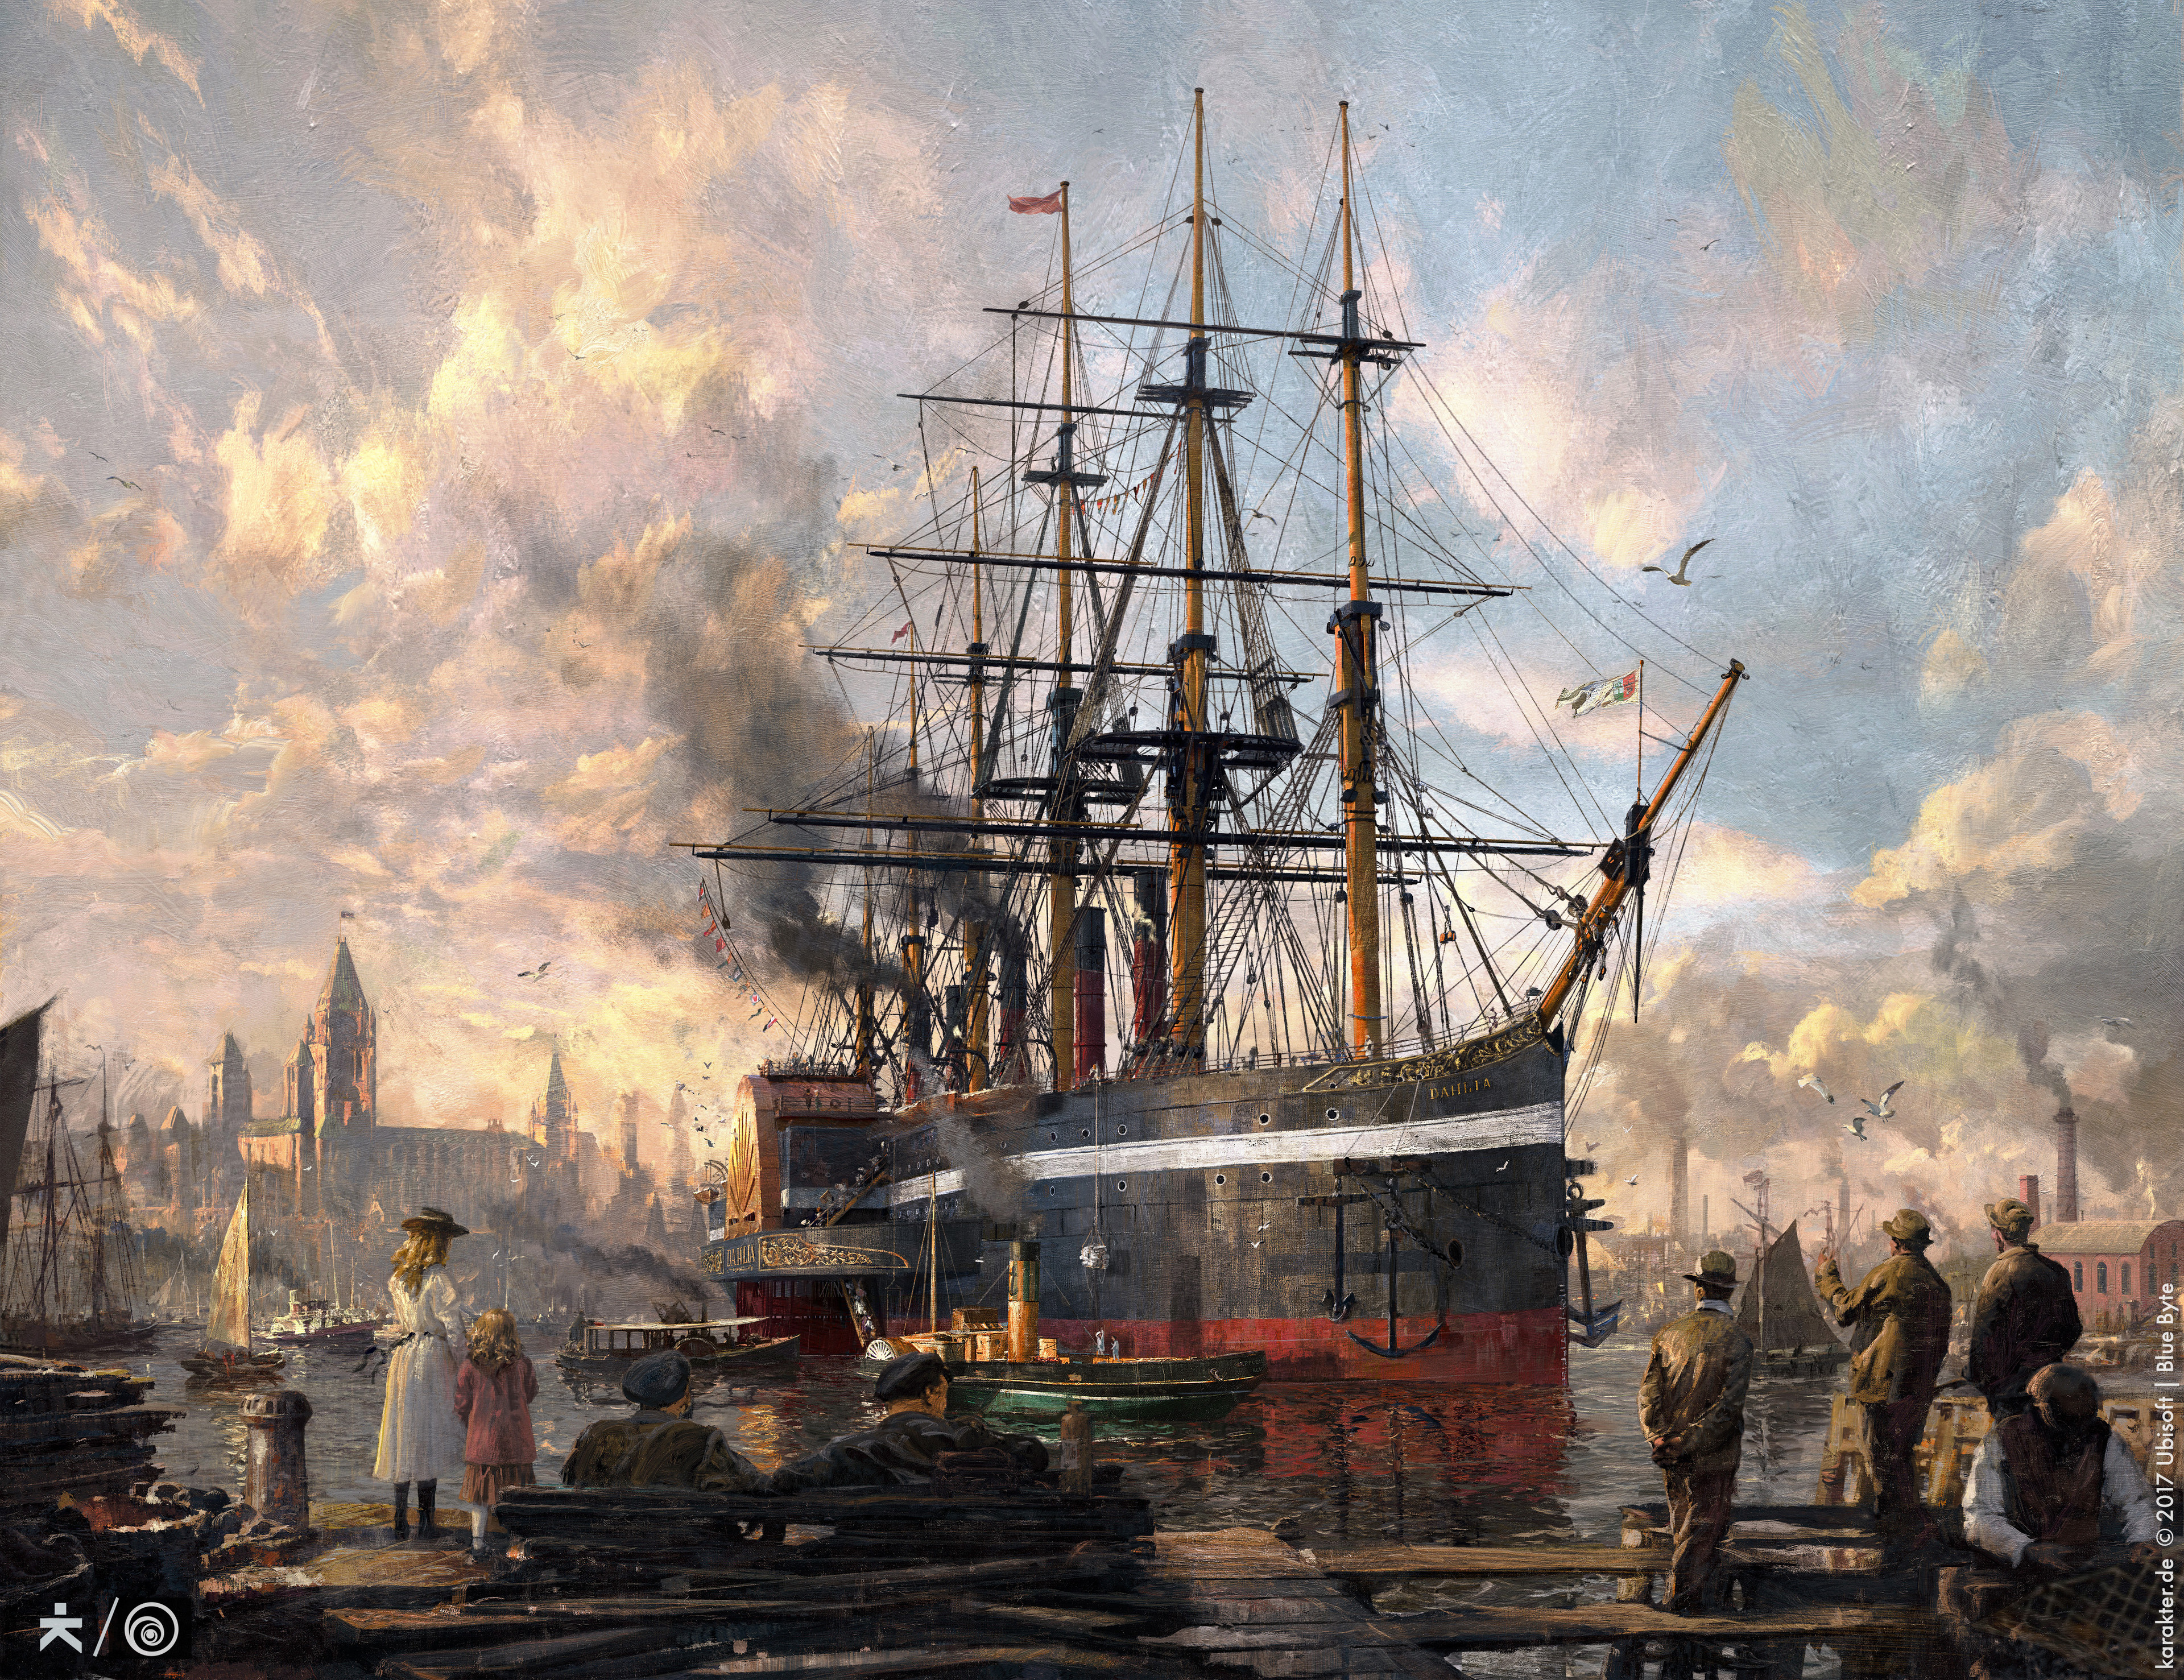 FINAL. Actually the client version has more sky on top to make room for the "Anno 1800" header. All 3D elements have been carefully painted over to get to the traditionell media look we were after.